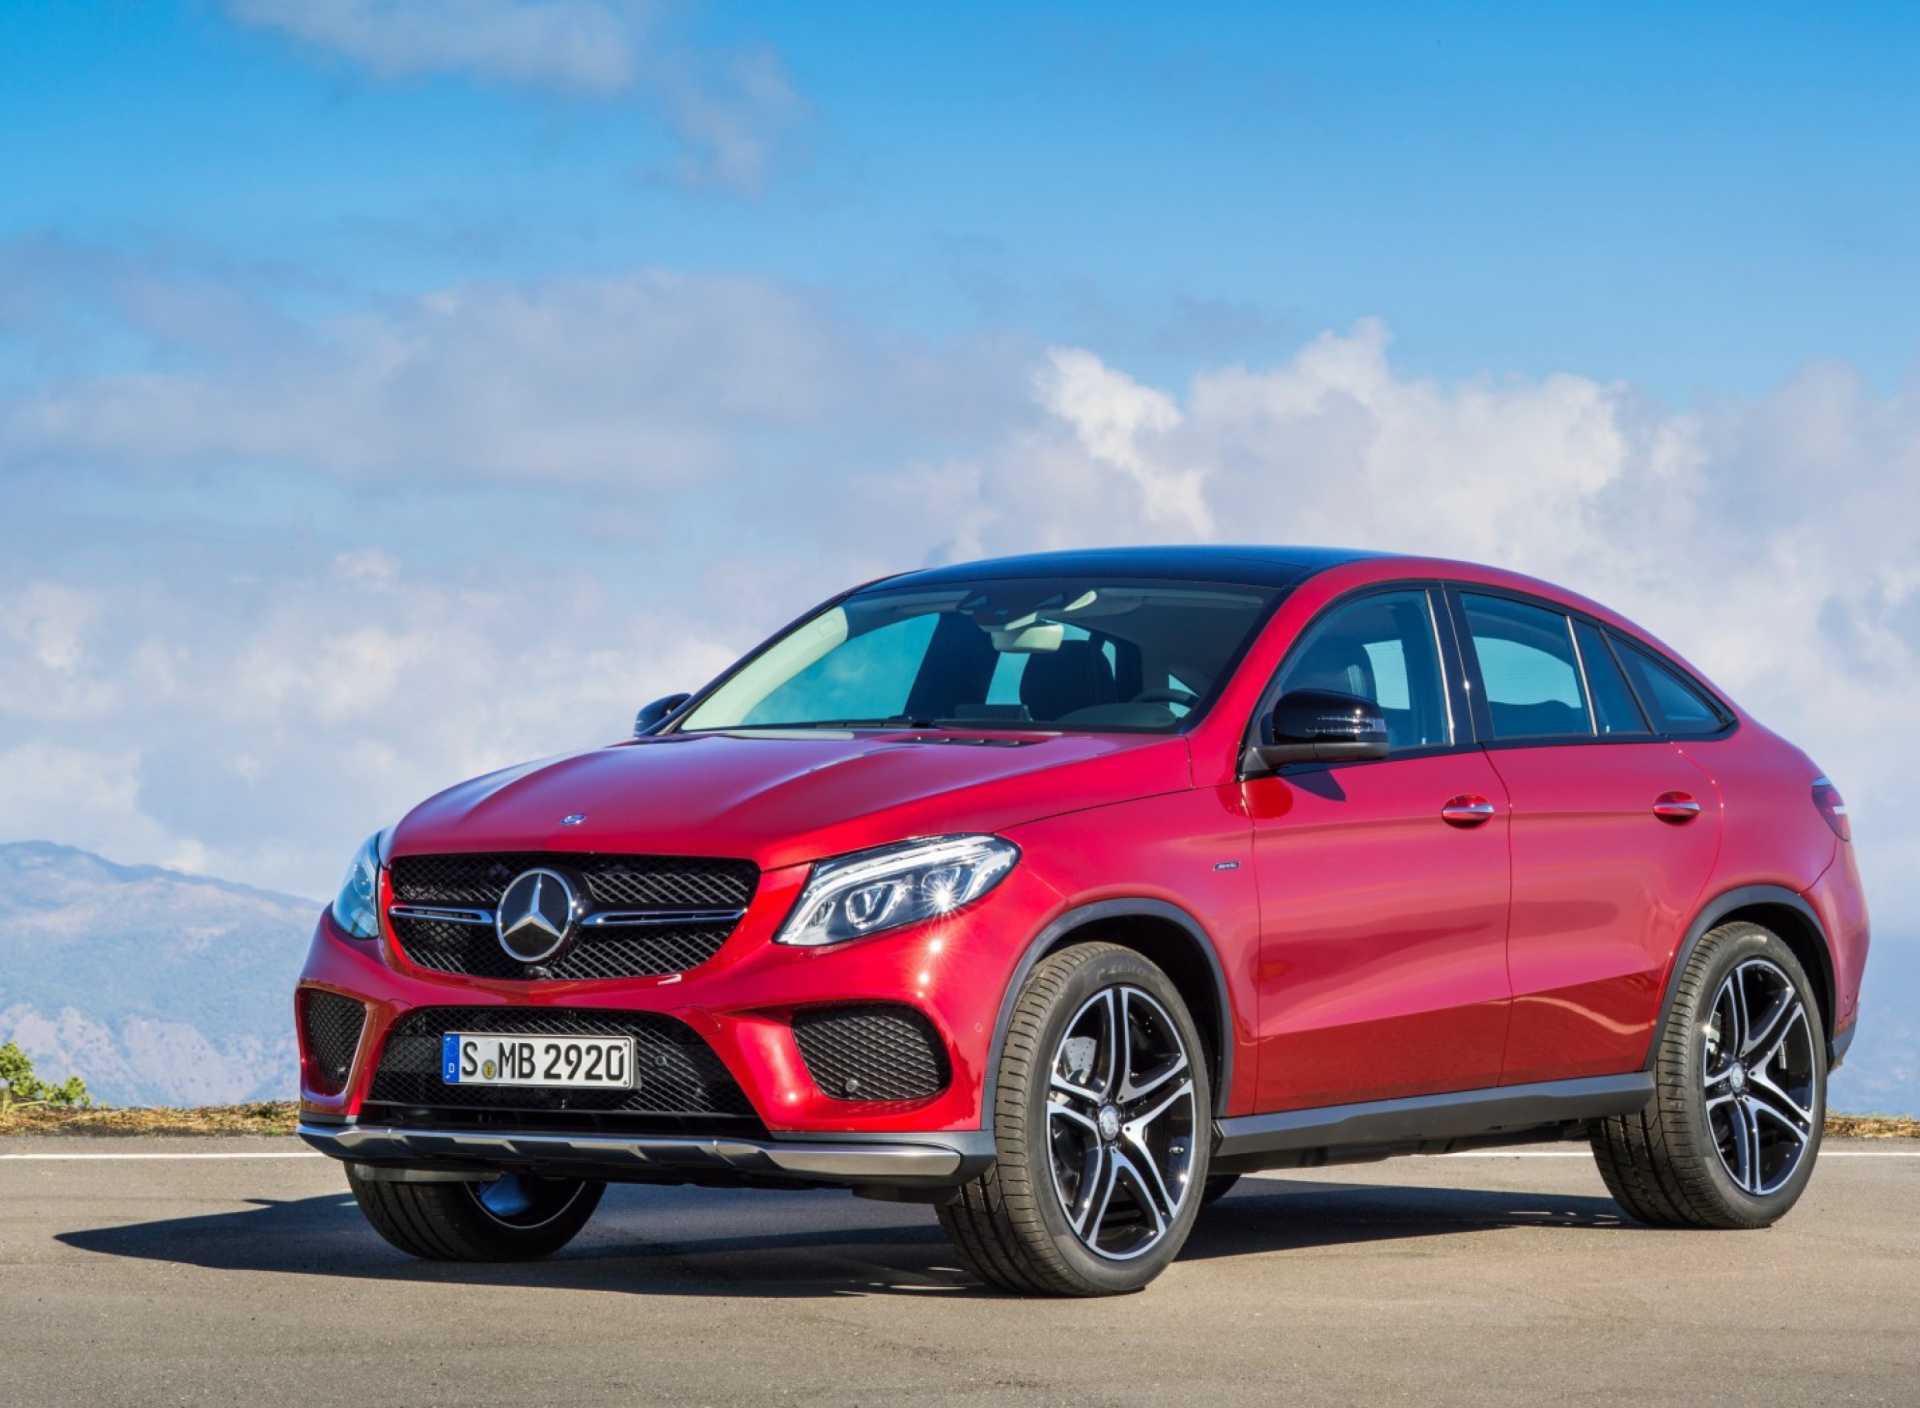 2016 Mercedes Benz GLE 450 AMG Red wallpaper 1920x1408